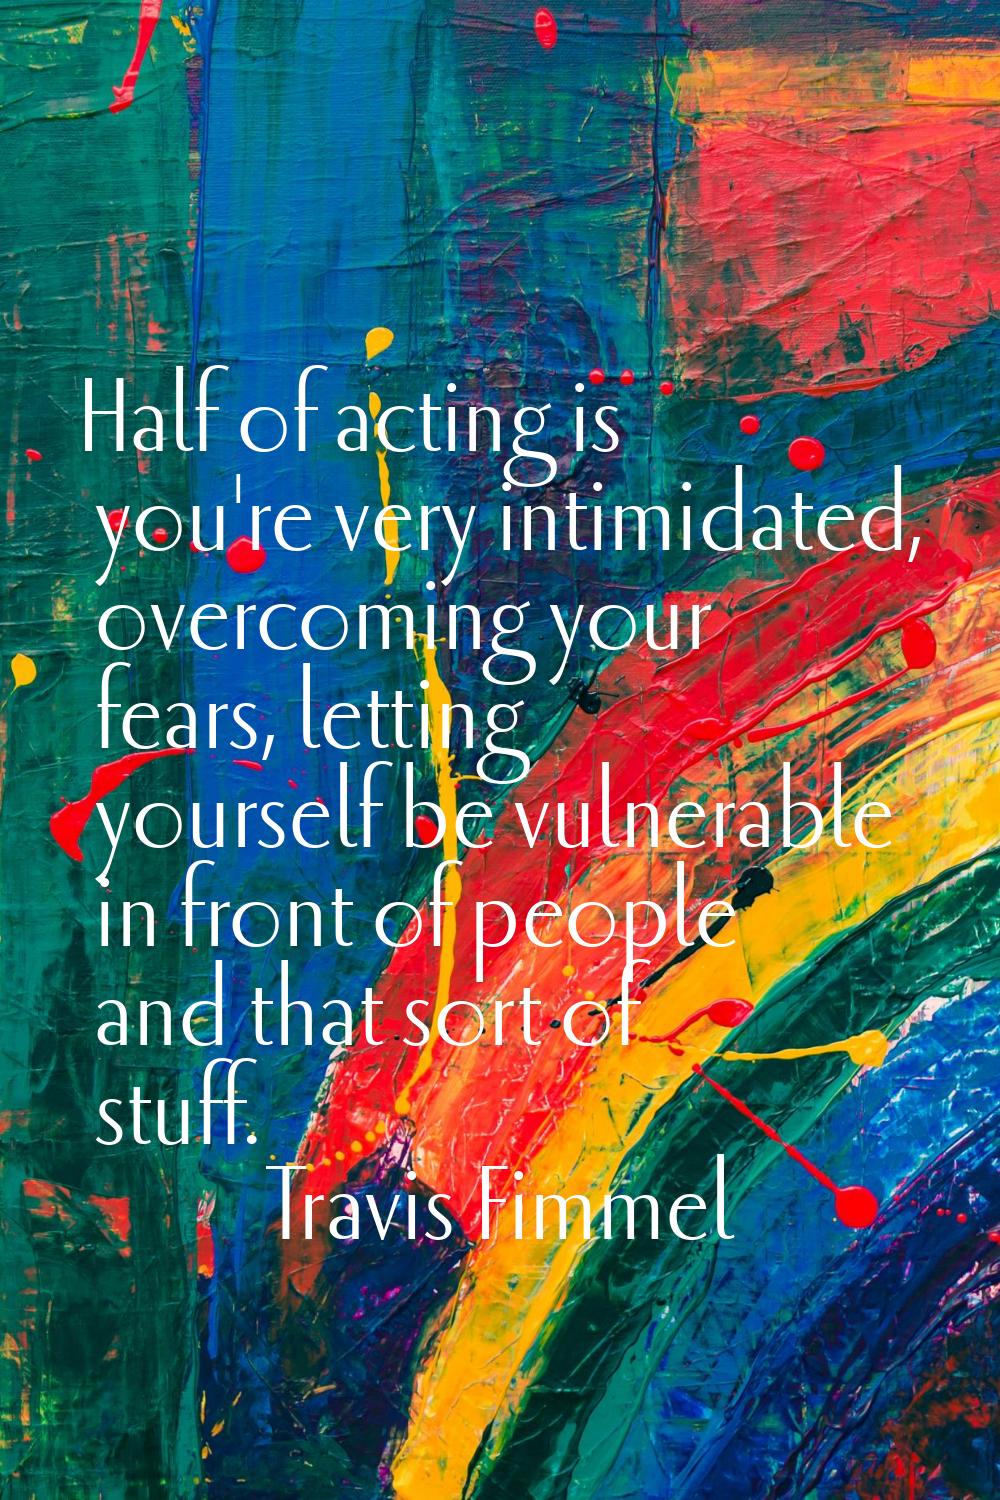 Half of acting is you're very intimidated, overcoming your fears, letting yourself be vulnerable in